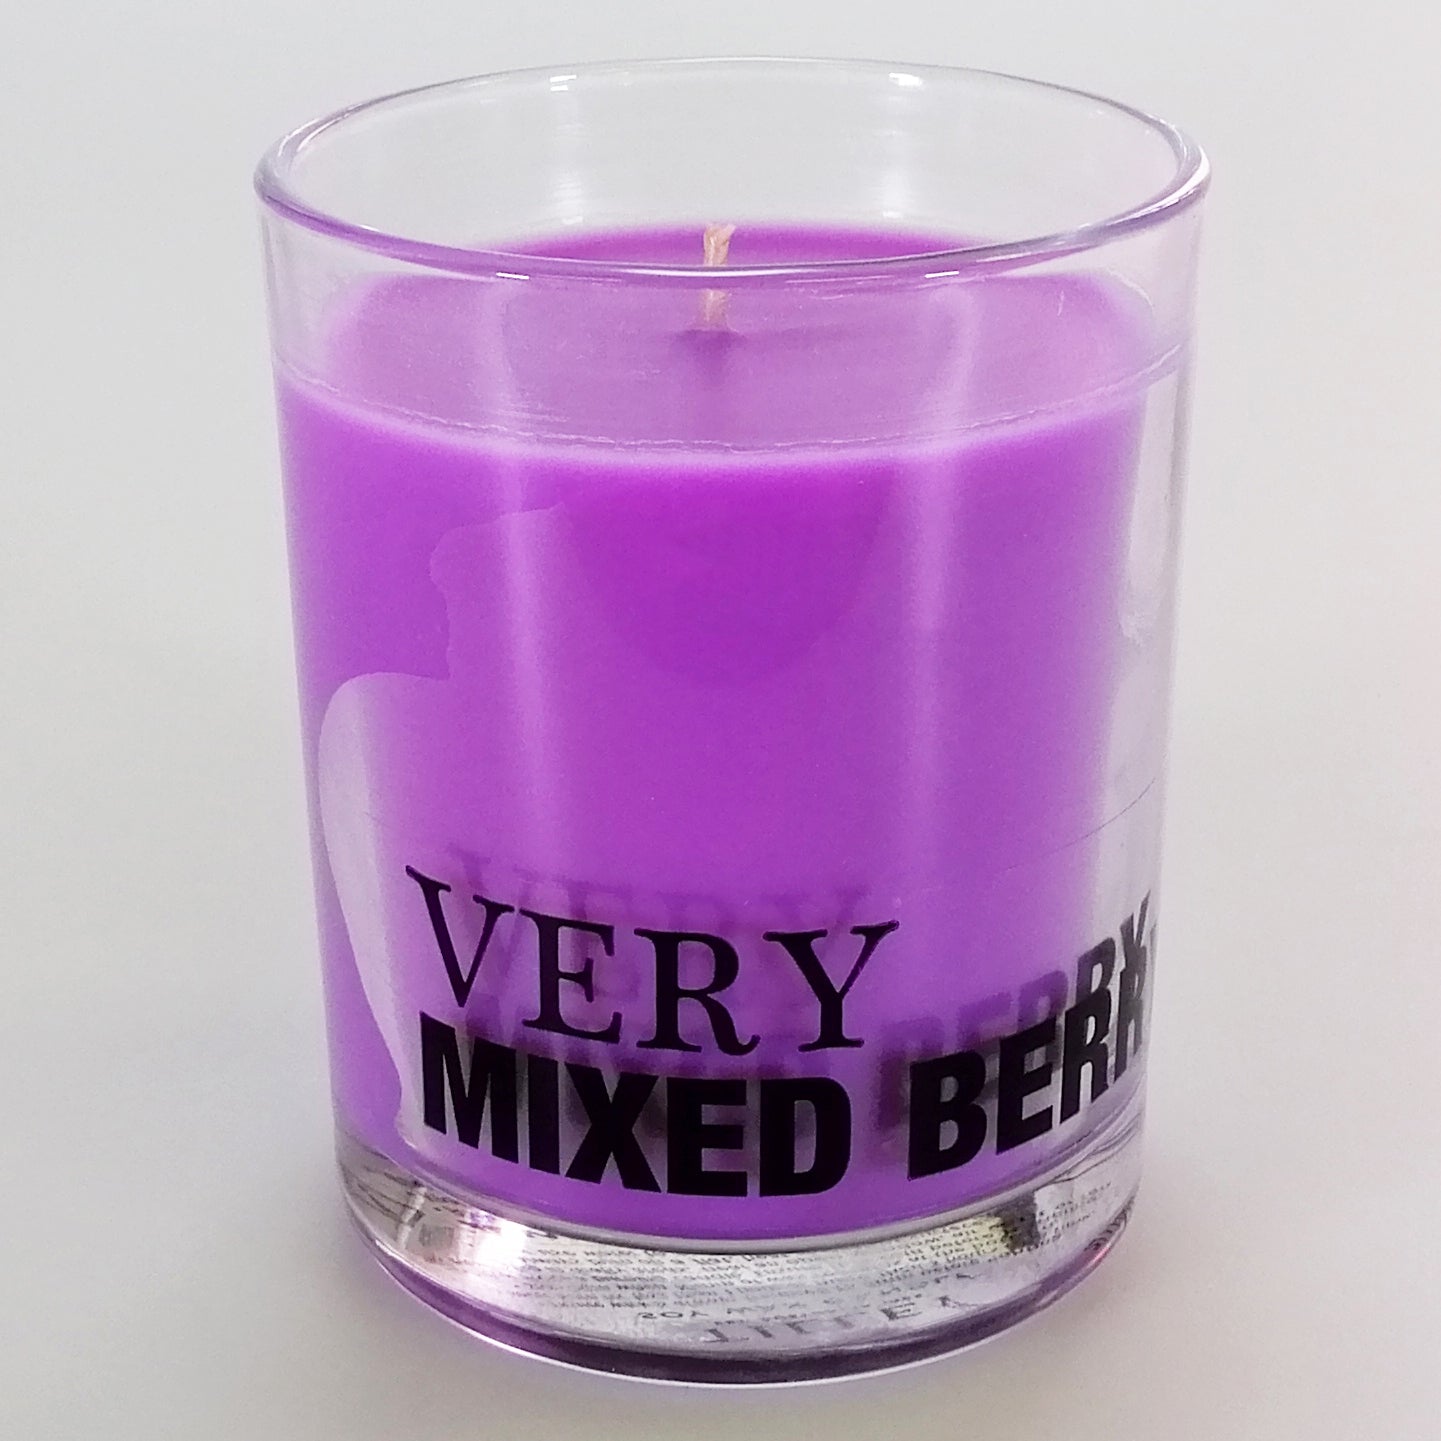 Vegetable Wax Candle - Very Mixed Berry - 240g